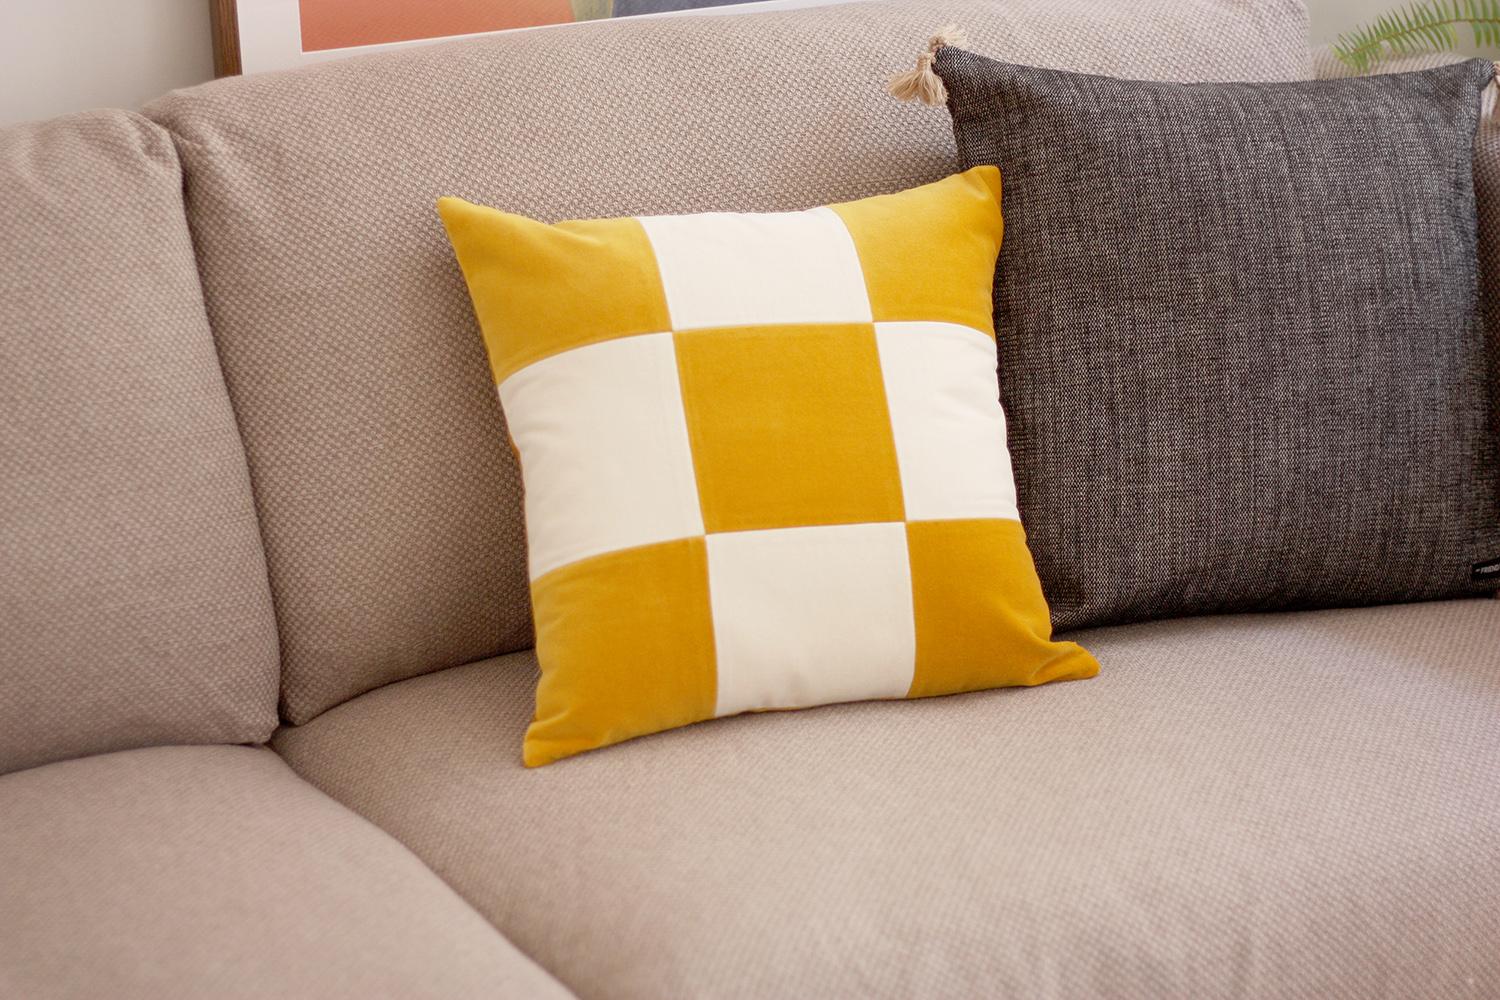 A talisman for the home of beauty, good energies and comfort. 
This decorative pillow is ethically produced by small family run business, hand-made by skilled portuguese artisans with top quality cotton velvet. Each piece is unique and made